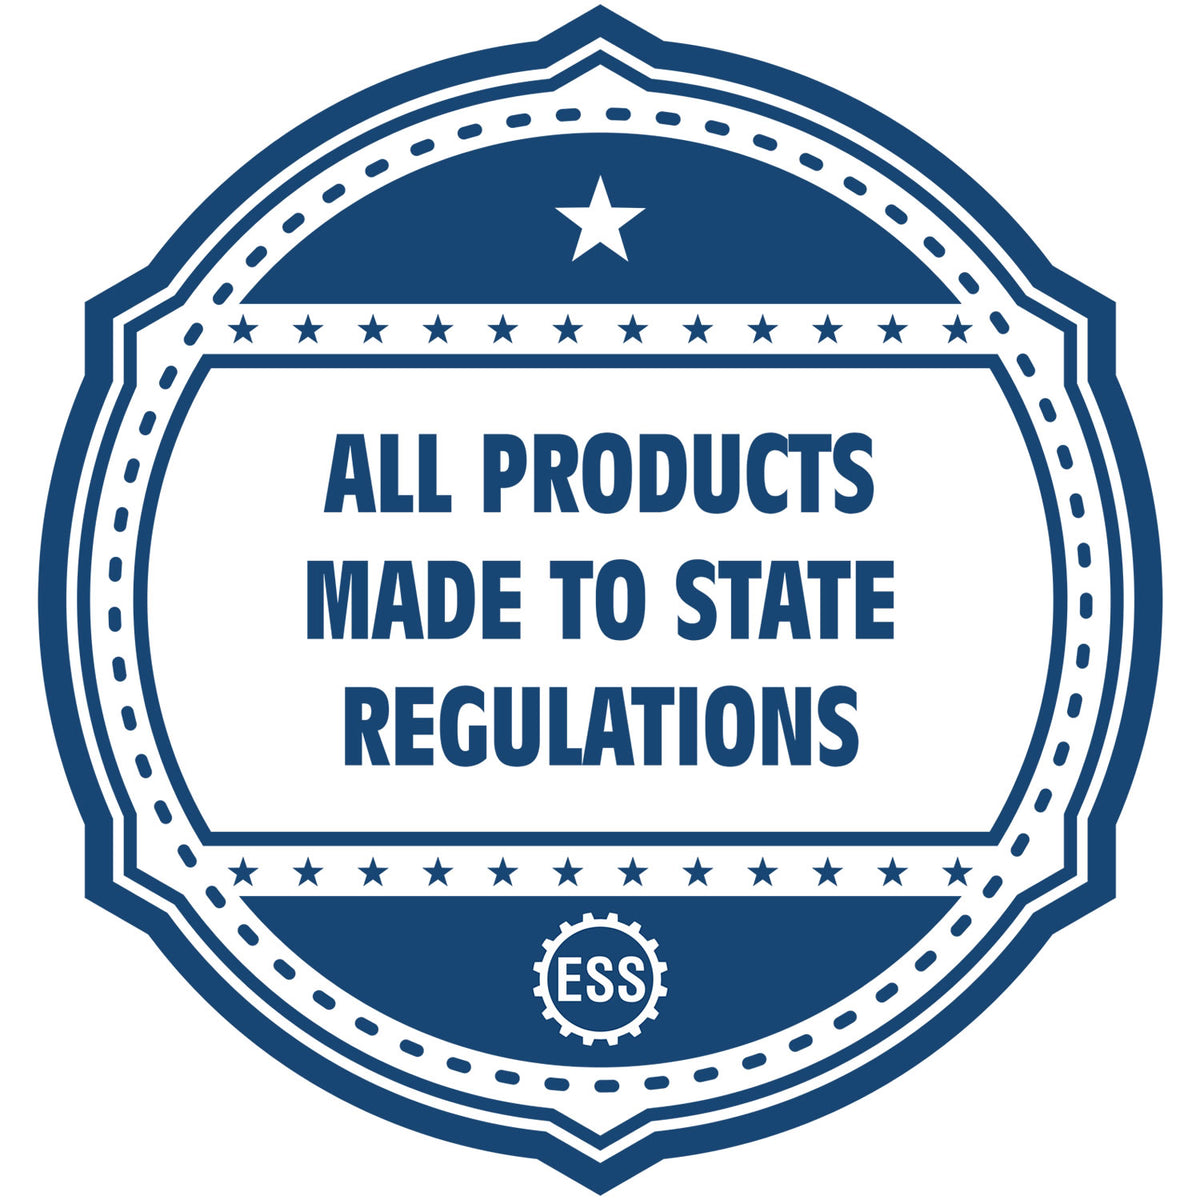 A blue icon or badge for the Heavy Duty Cast Iron New Mexico Geologist Seal Embosser showing that this product is made in compliance with state regulations.